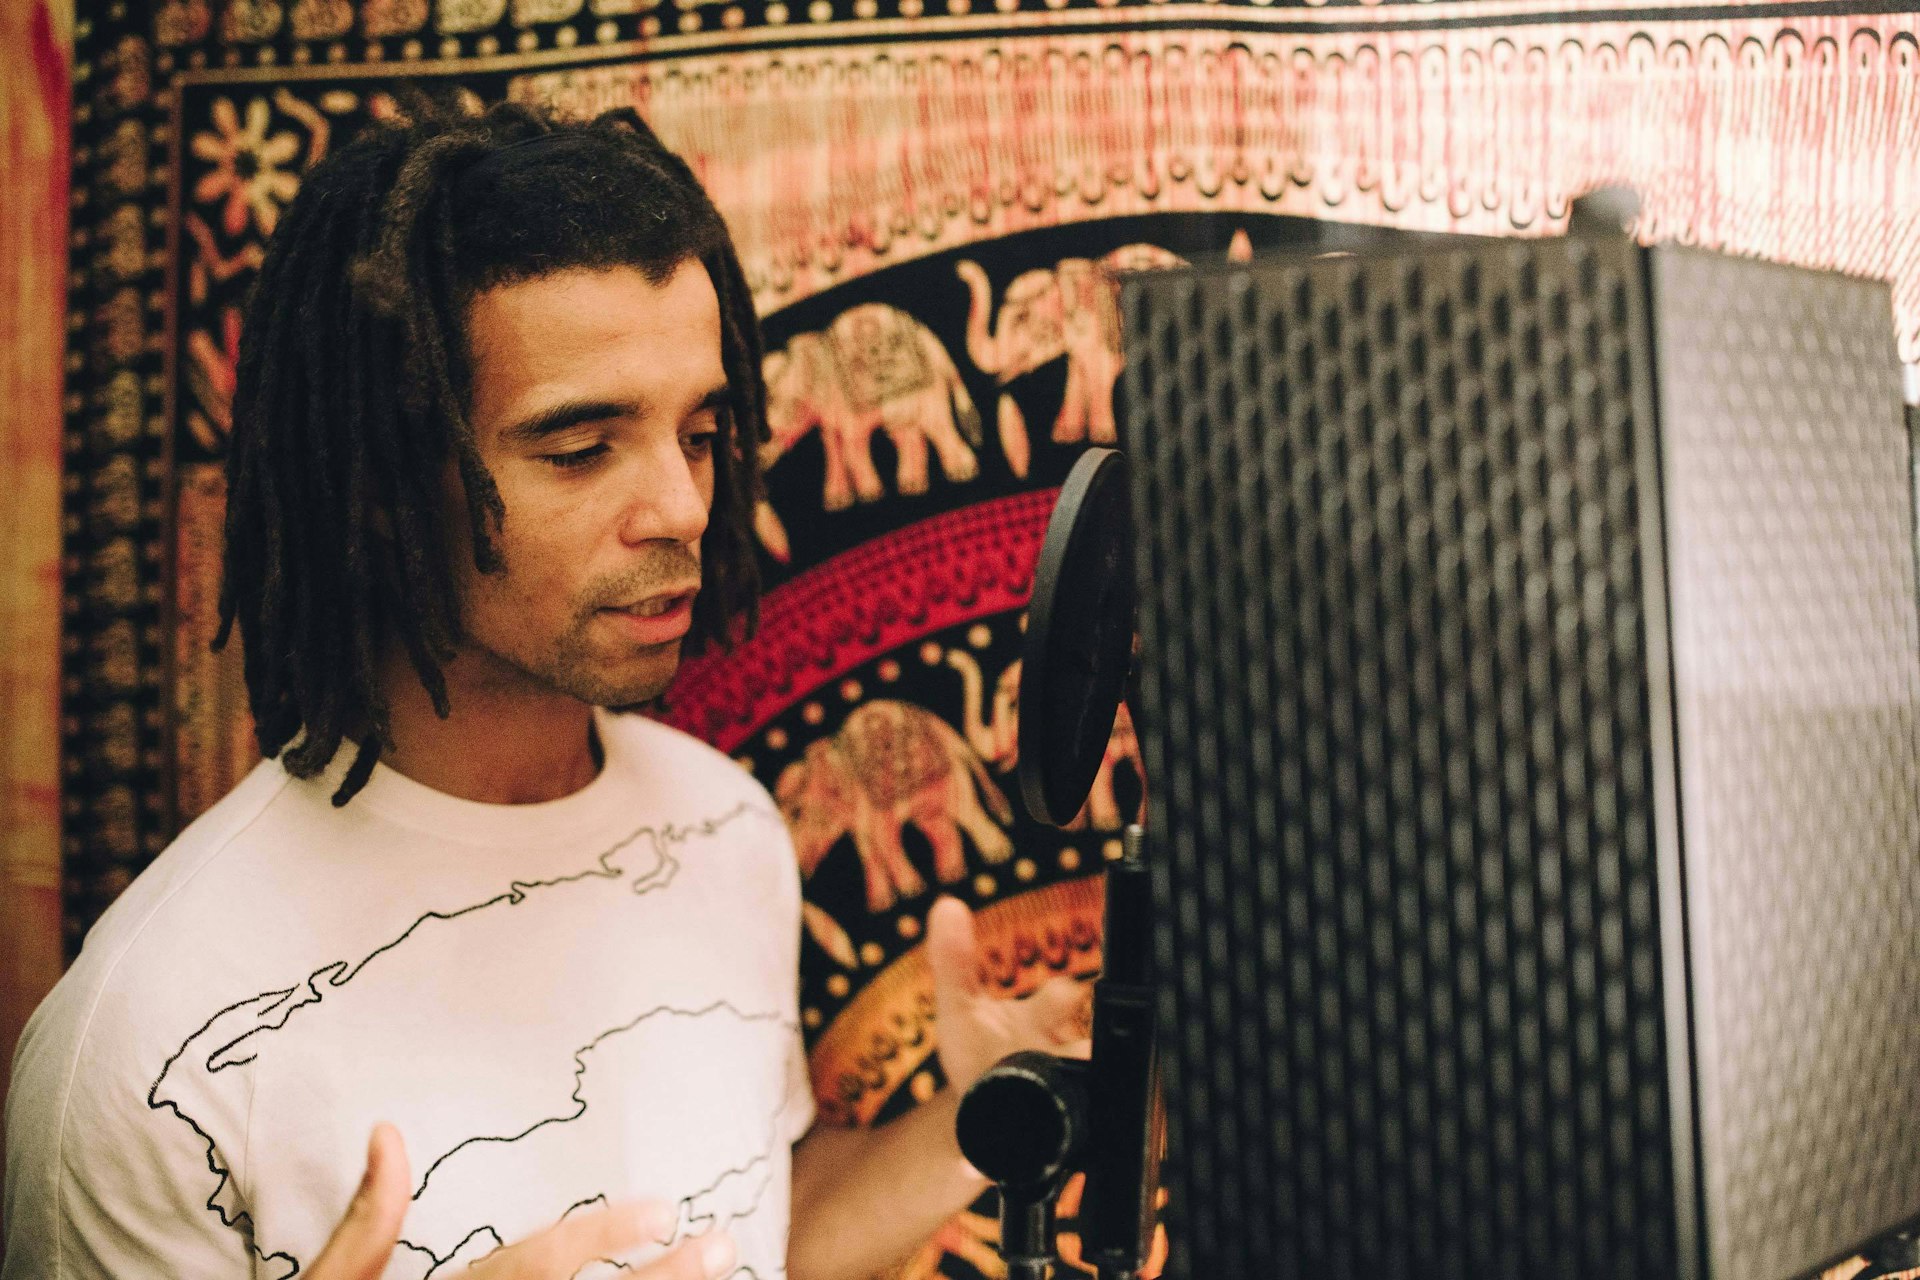 British rapper Akala on the virtues and limits of practicing what you preach